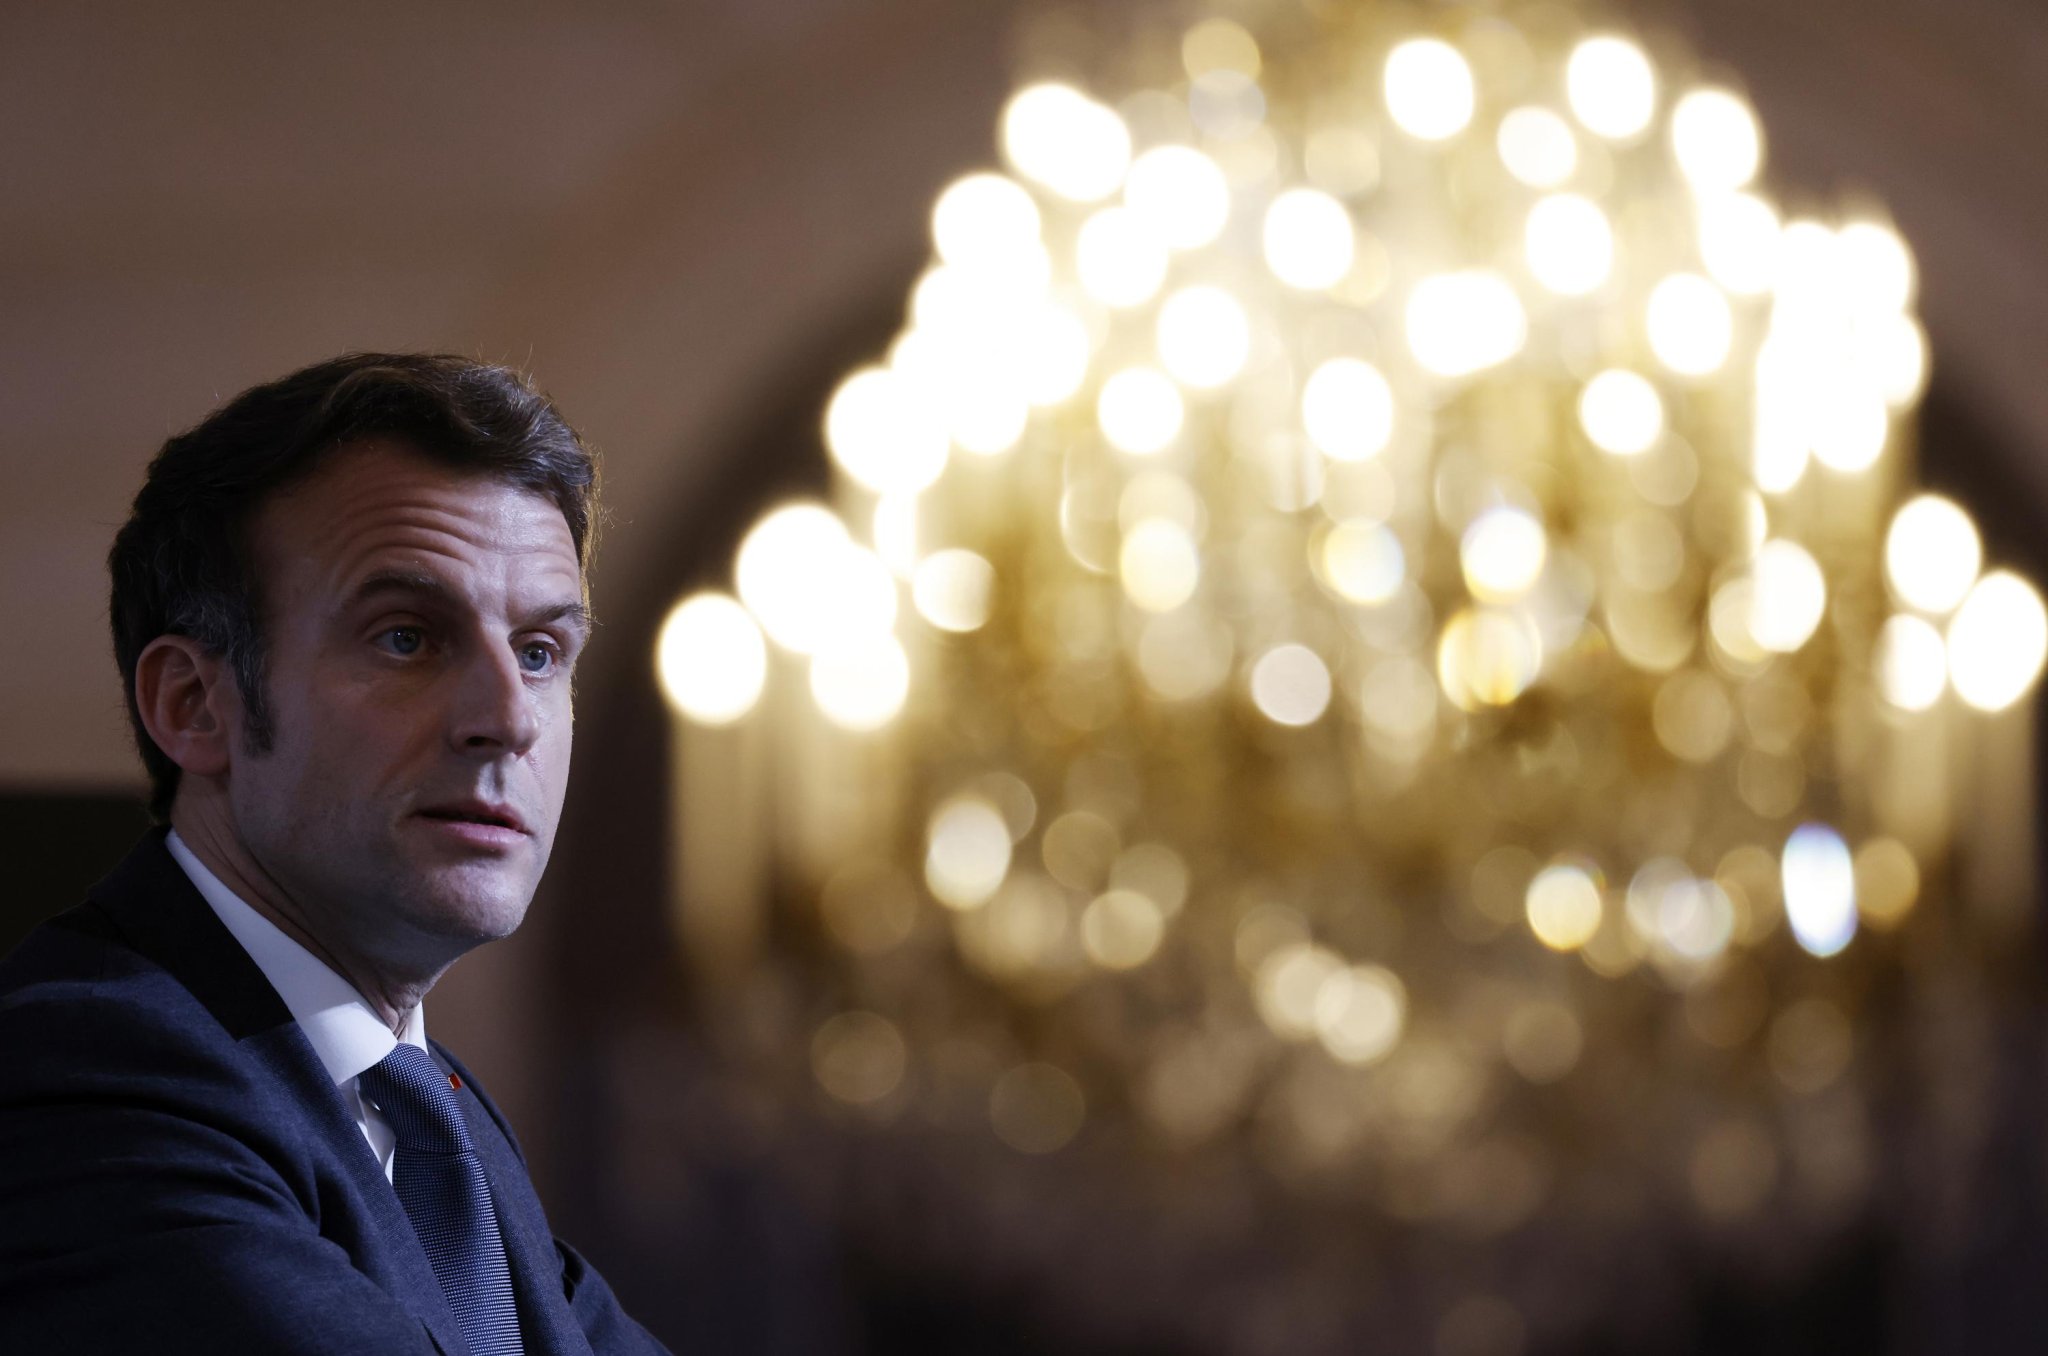 France's Macron takes own path, seeks dialogue with Russia